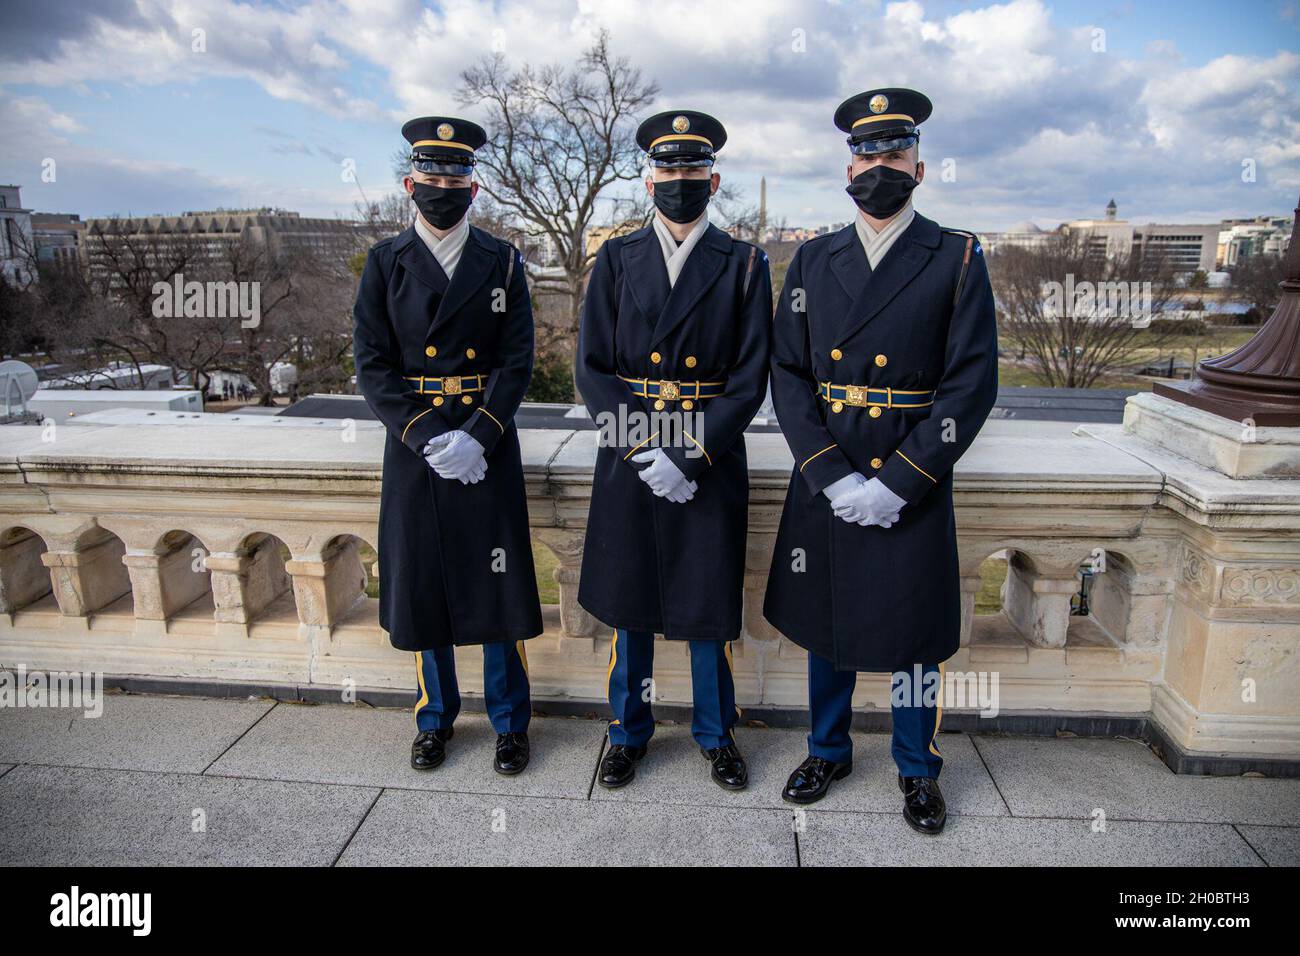 Soldiers of The 3d U.S. Infantry Regiment (The Old Guard) pose for a  picture during the 59th Presidential Inauguration in Washington, D.C., Jan.  20, 2021. Military members from across all branches of